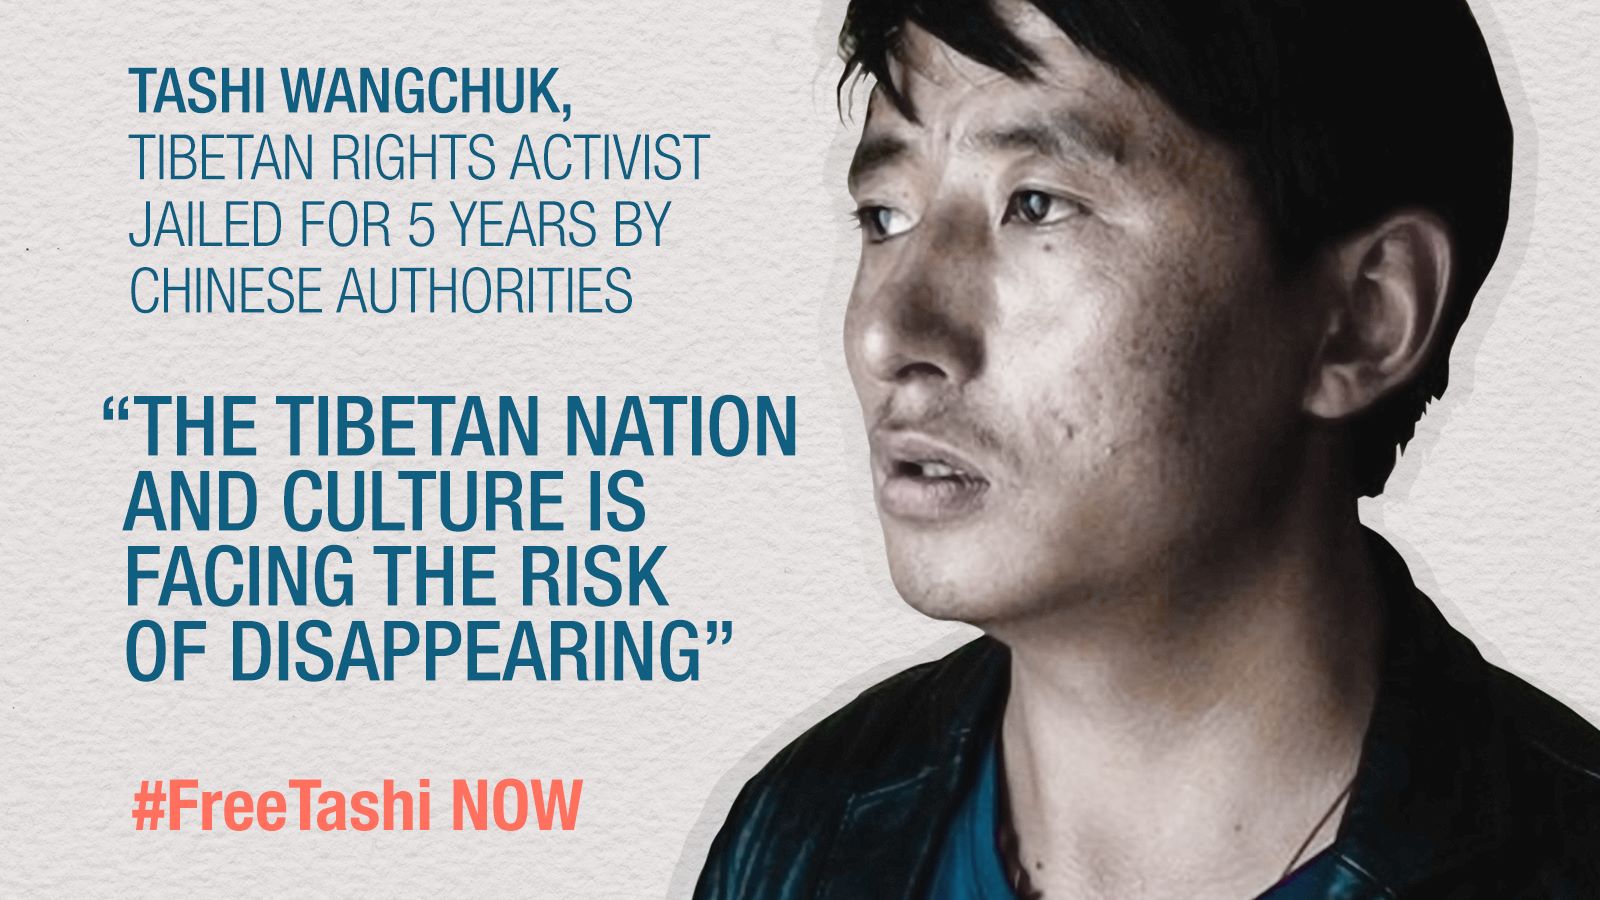 Tibetan activist and political prisoner, Tashi Wangchuk, denied a visit with his lawyer ahead of the three year anniversary of his detention